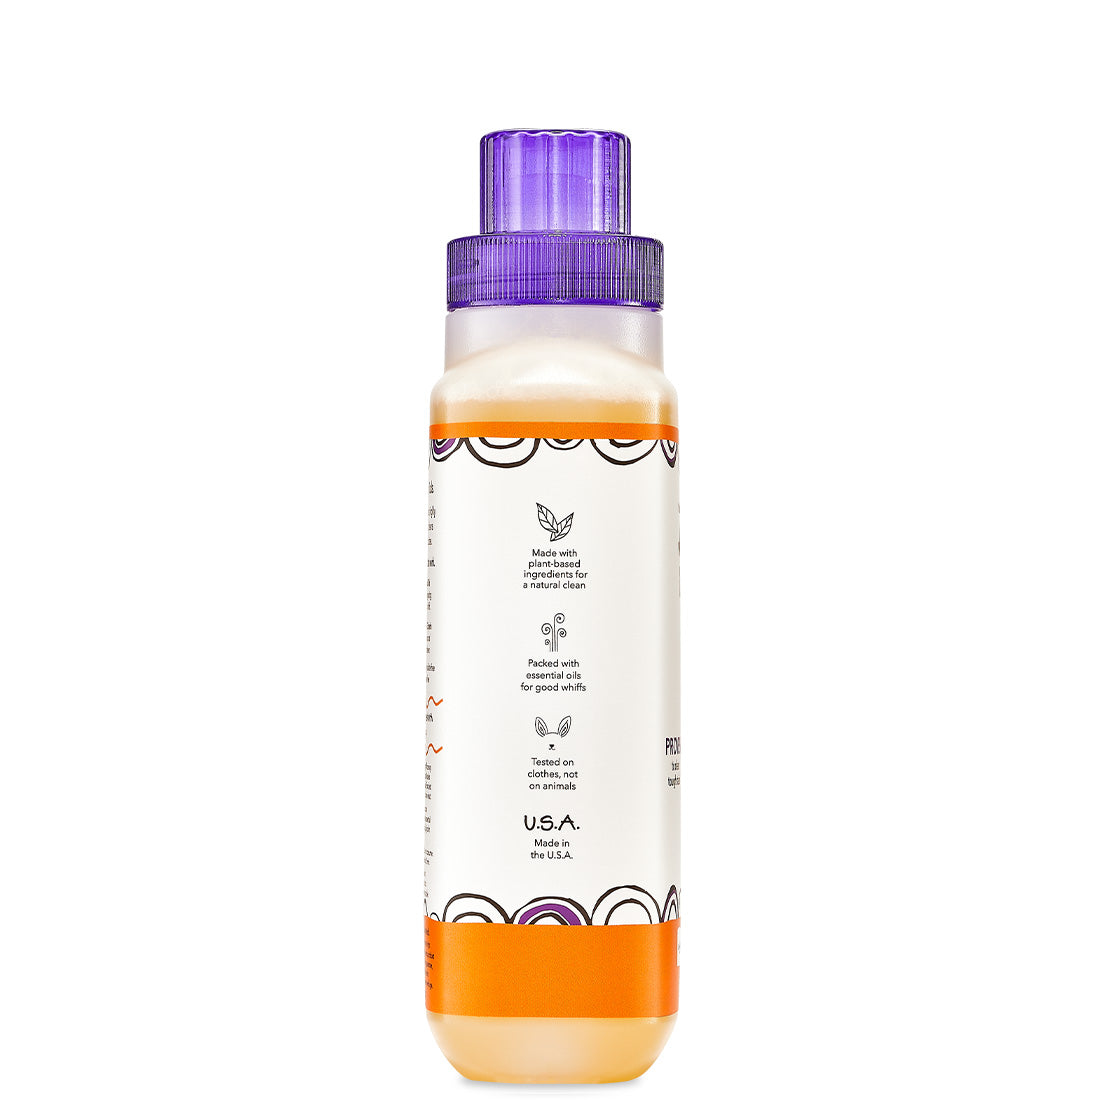 Side view of bottle with screw cap containing Sweet Orange Zum Laundry Soap